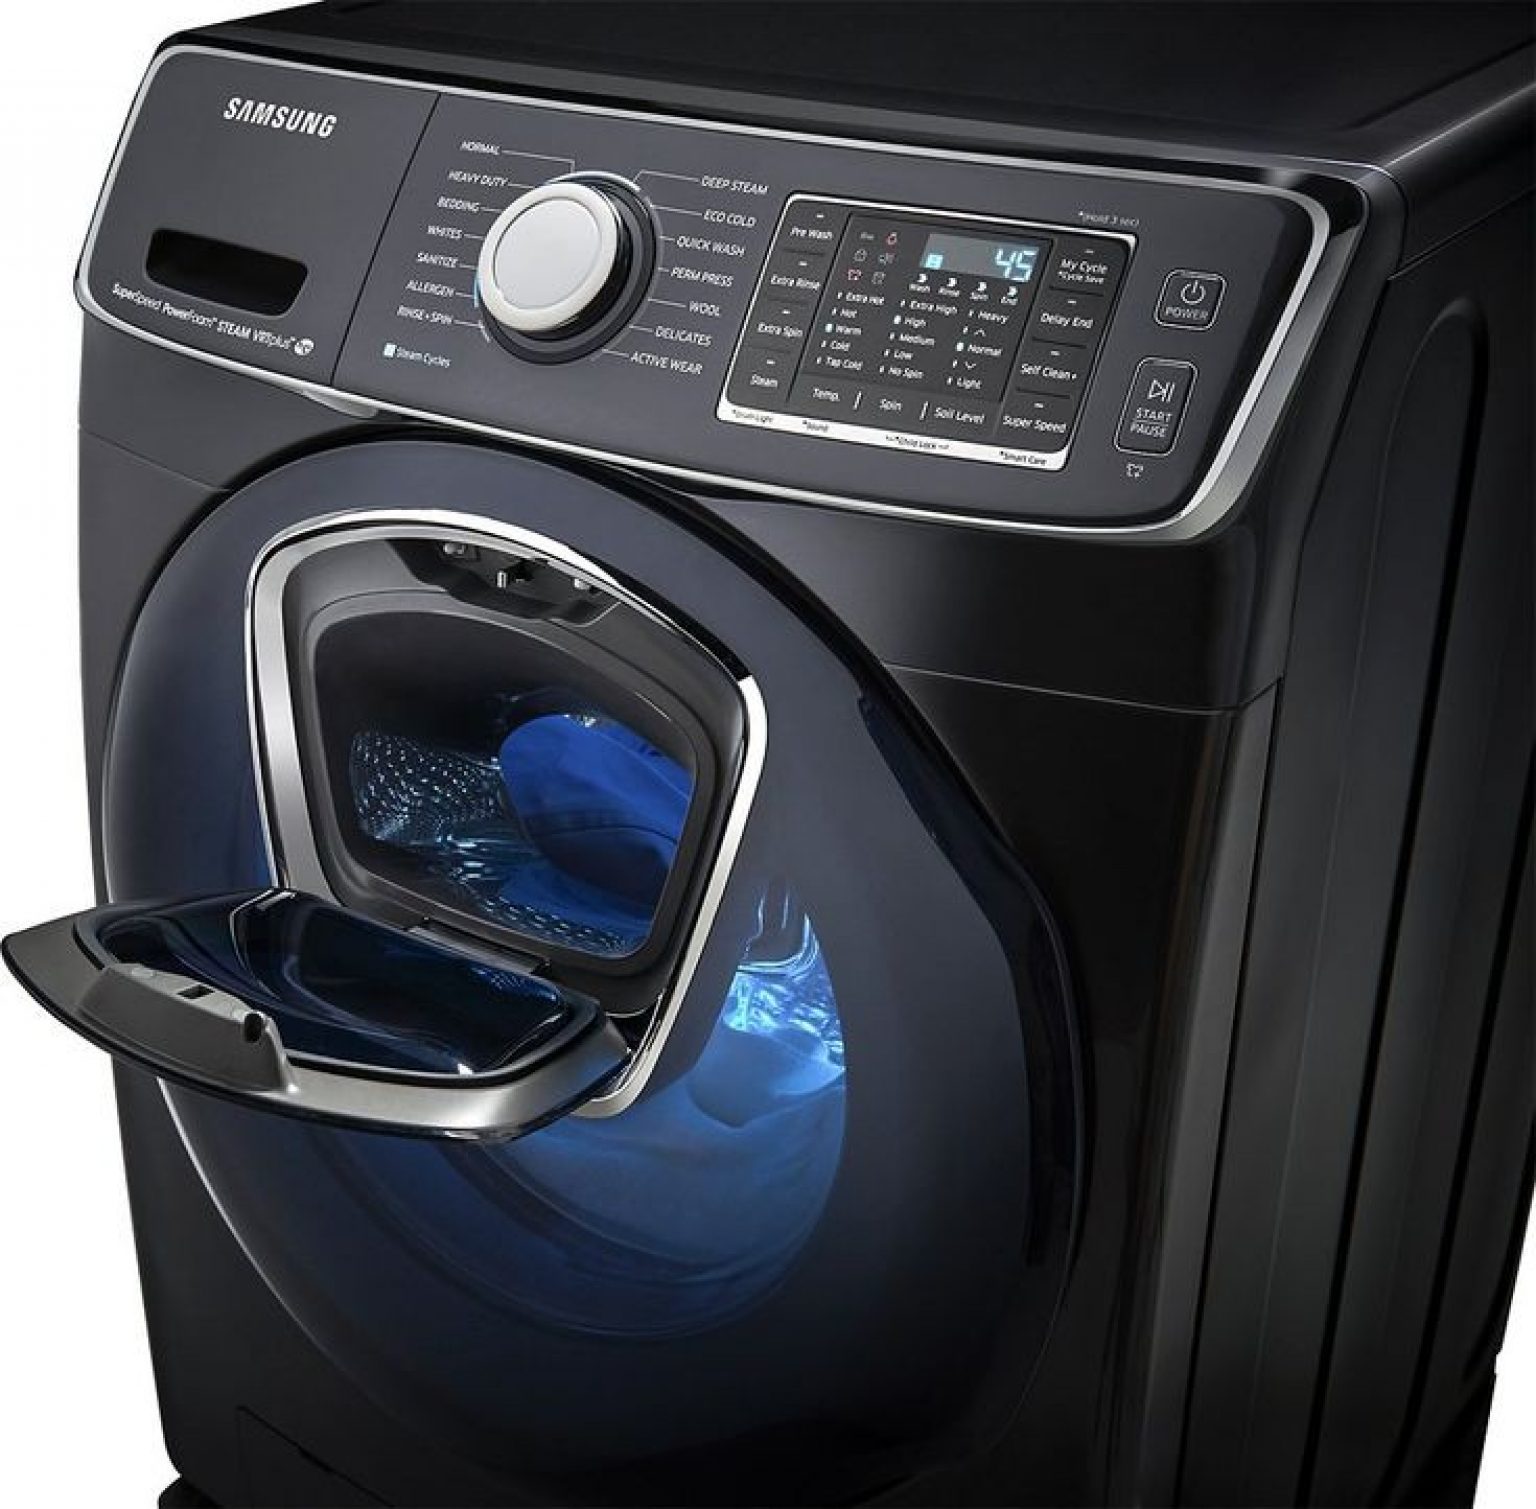 10 Most Reliable & Best Washing Machine Brand To Buy in 2020 Guide